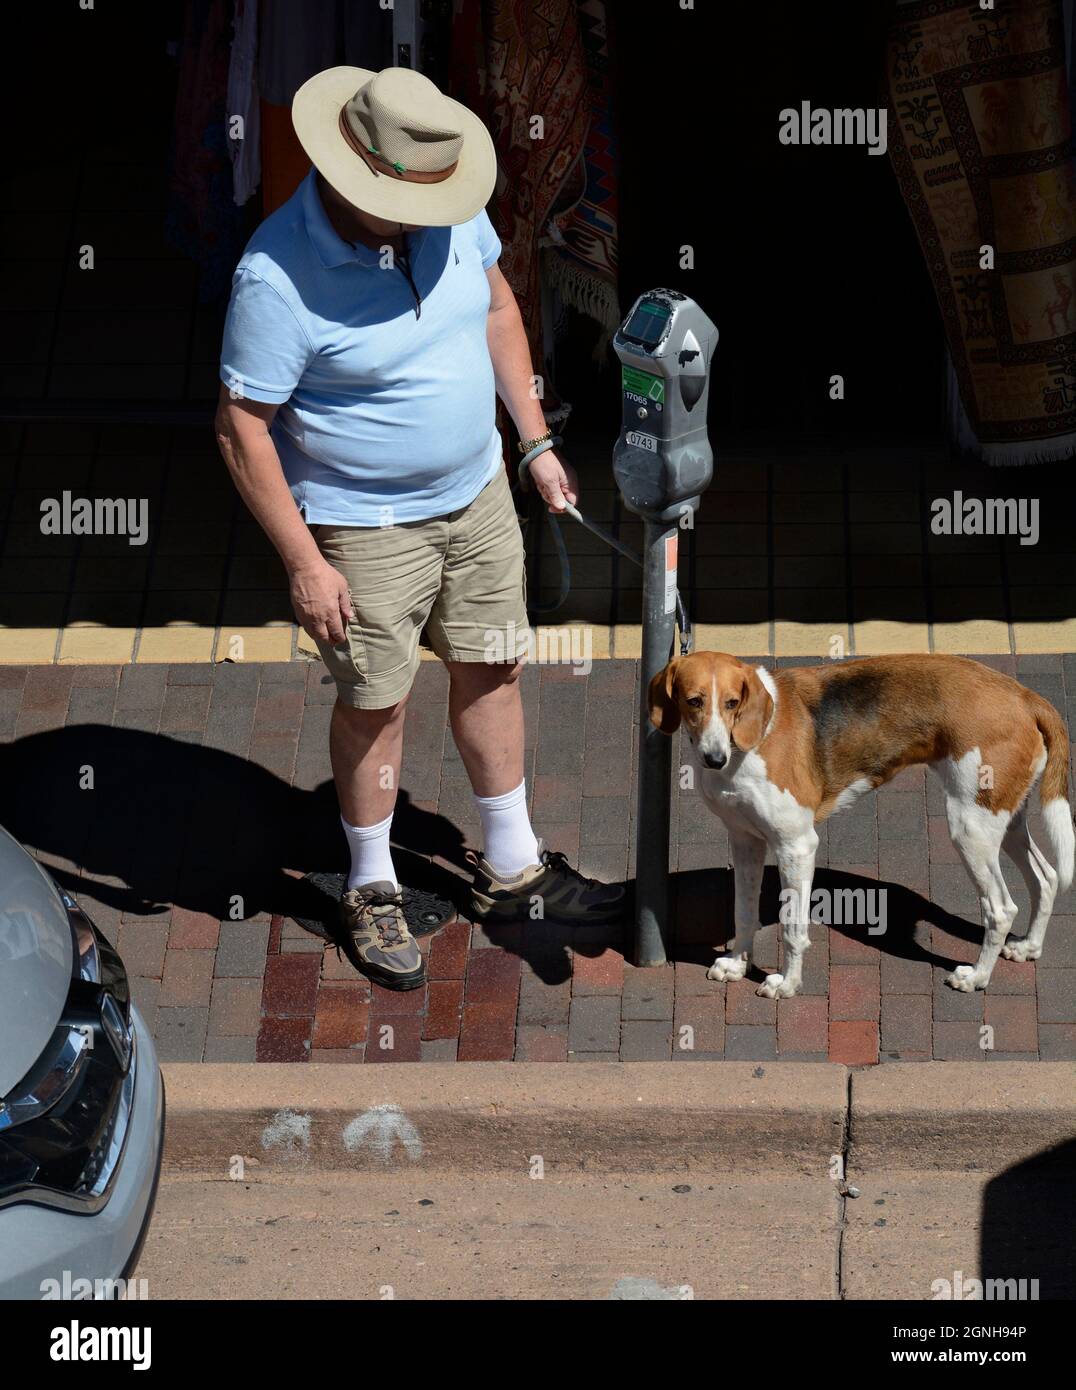 A man traveling with his pet dog prepares to put money in a parking meter in Santa Fe, New Mexico. Stock Photo